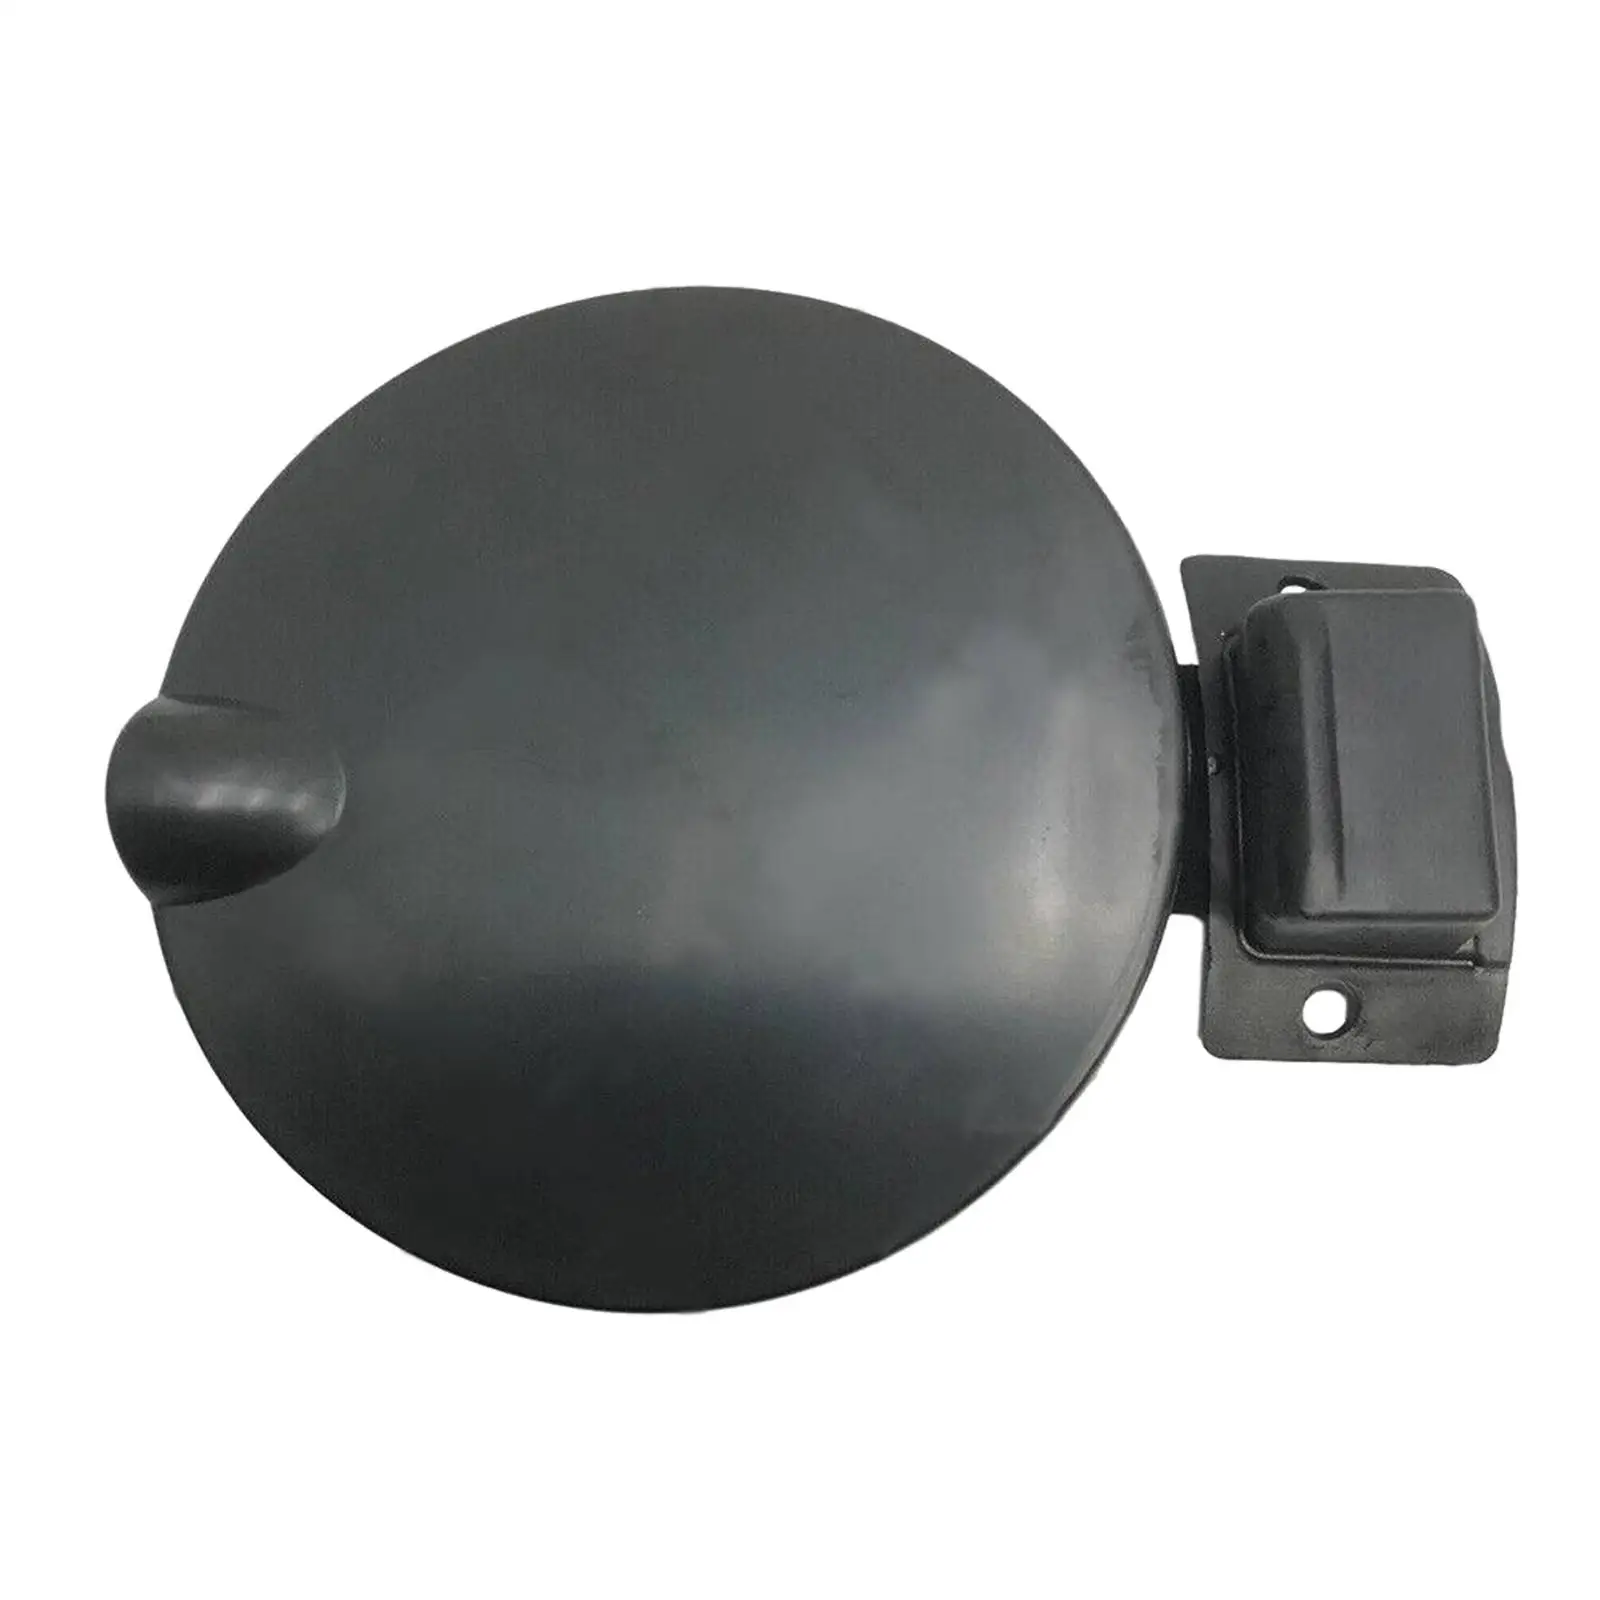 Fuel Filler Flap Fuel Tank Cap Accessories Assembly for Holden 2000 to 2007 Commodore Ute Convenient Installation